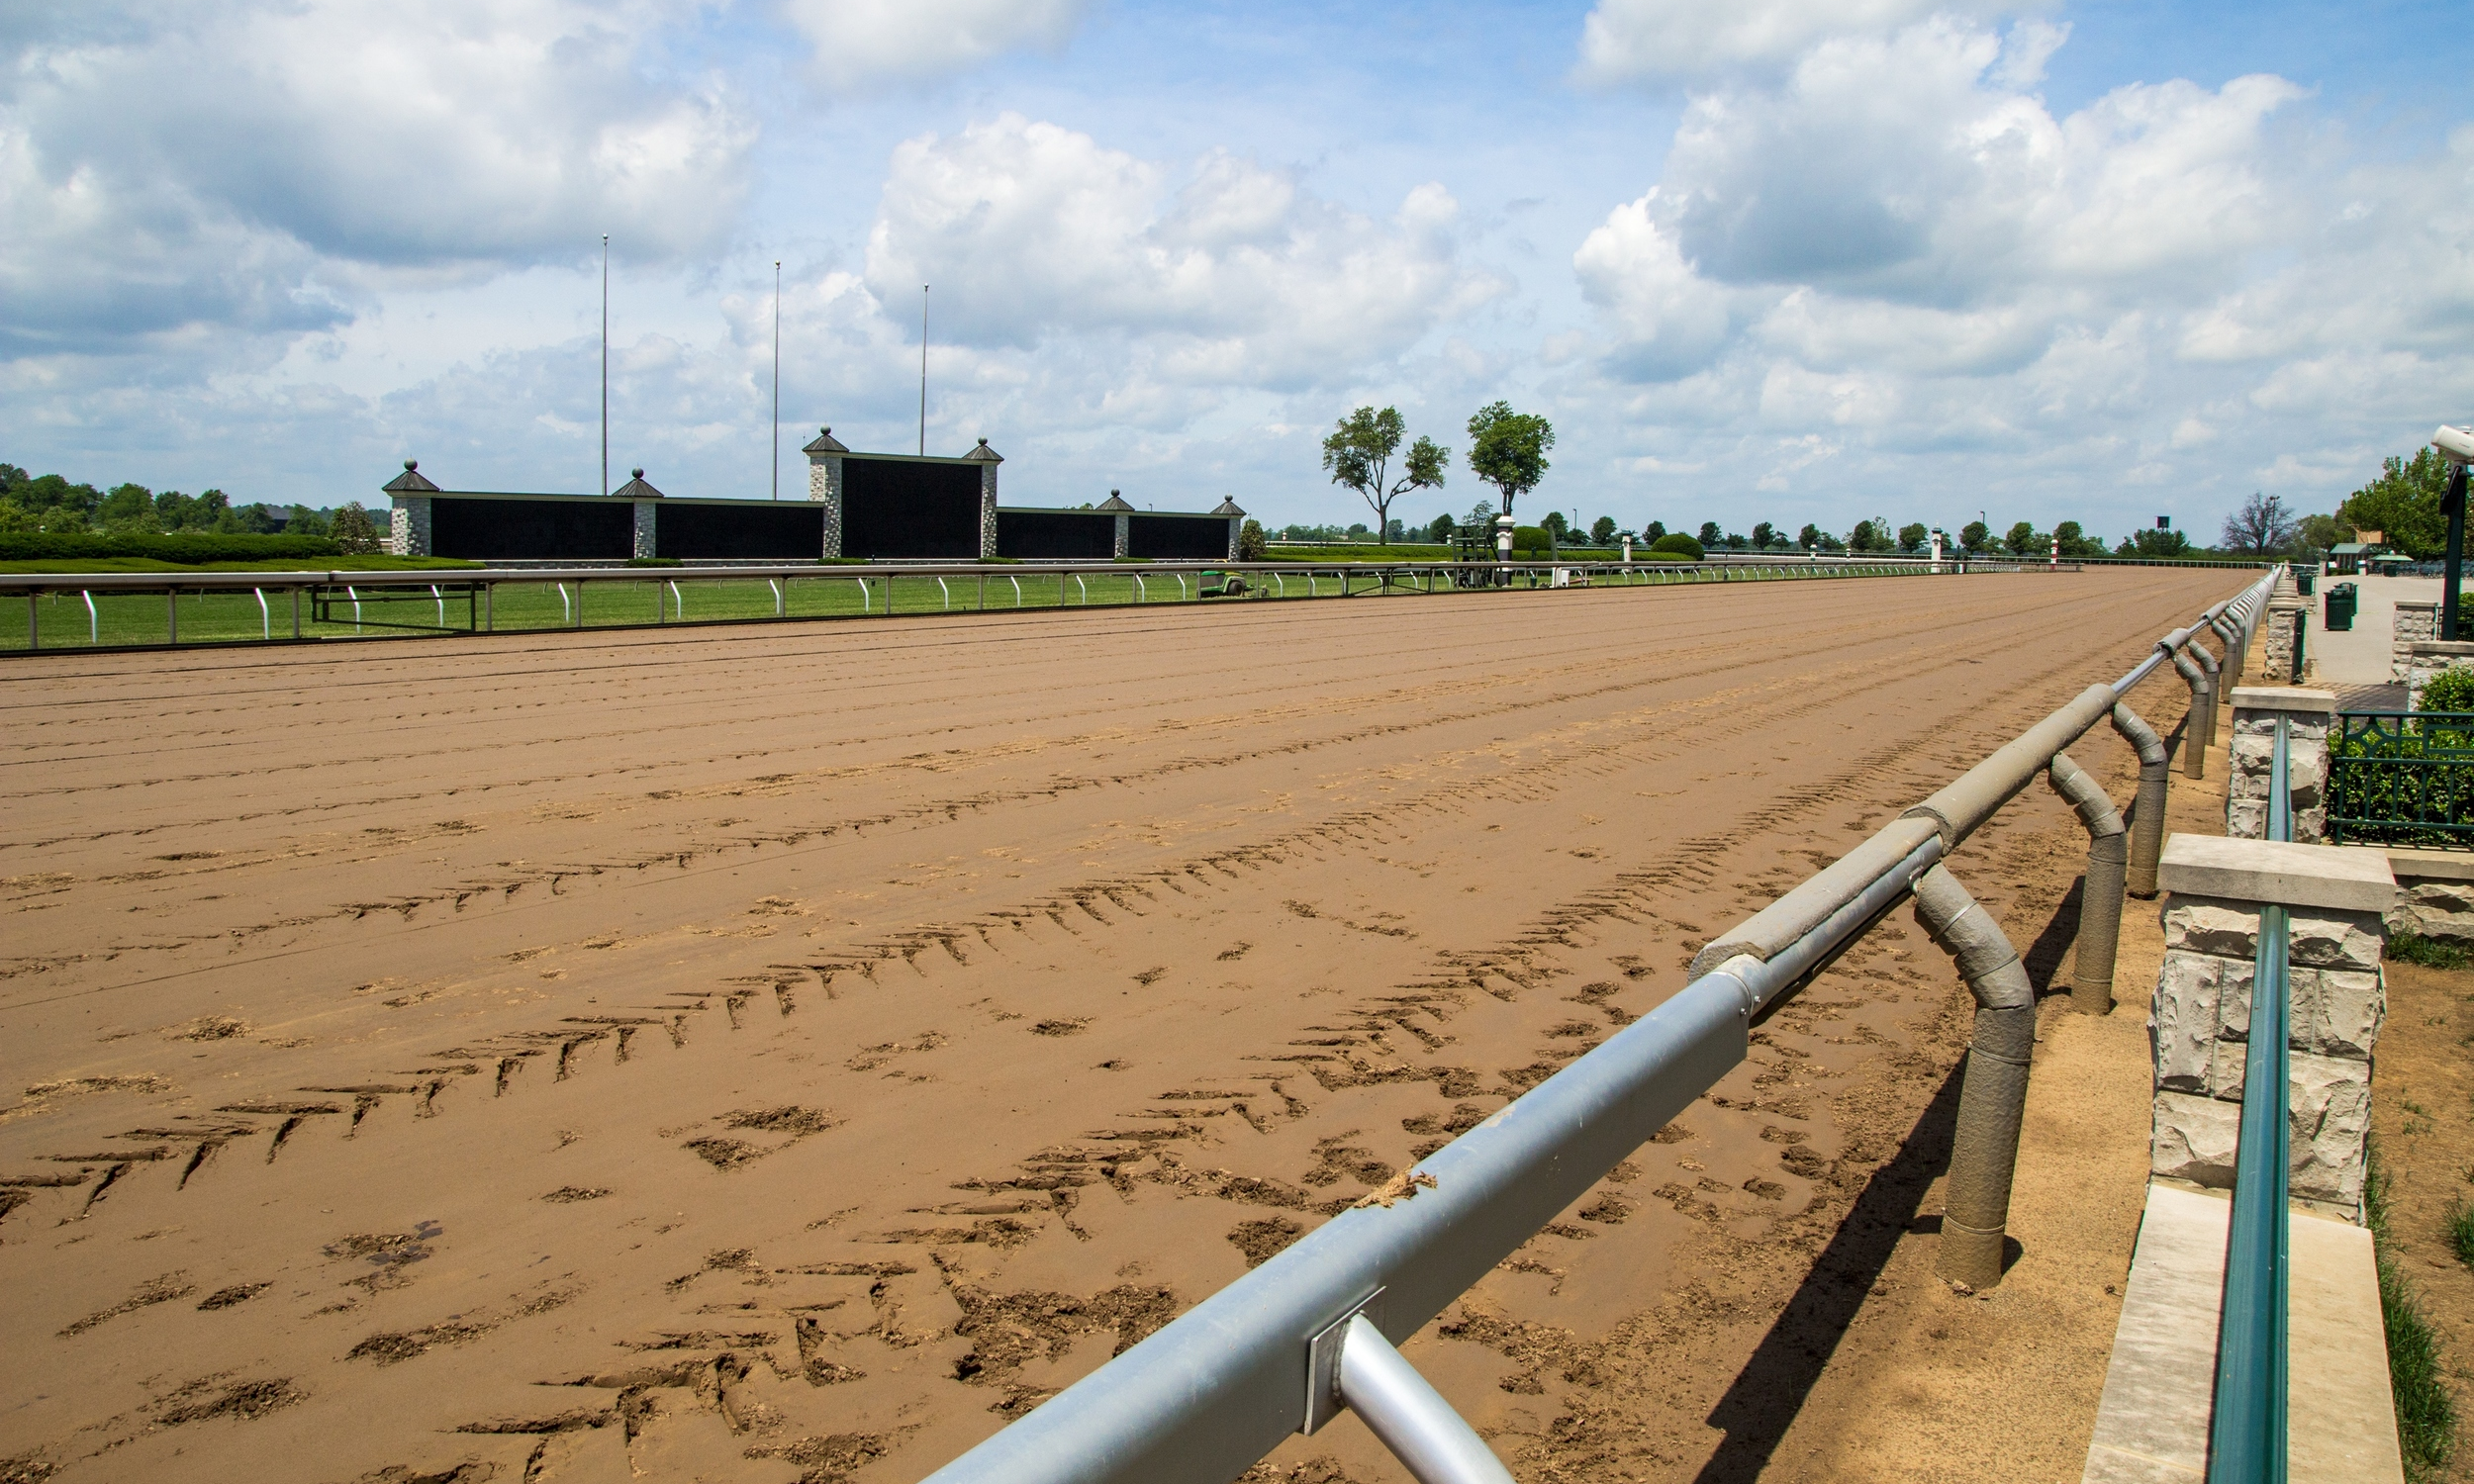  Lexington Kentucky. USA. June 1 2015. Keeneland racetrack in Lexington Kentucky prepares to host the 2015 Breeders Cup. Keeneland is considered to be the premier horse racing facility in the US. 